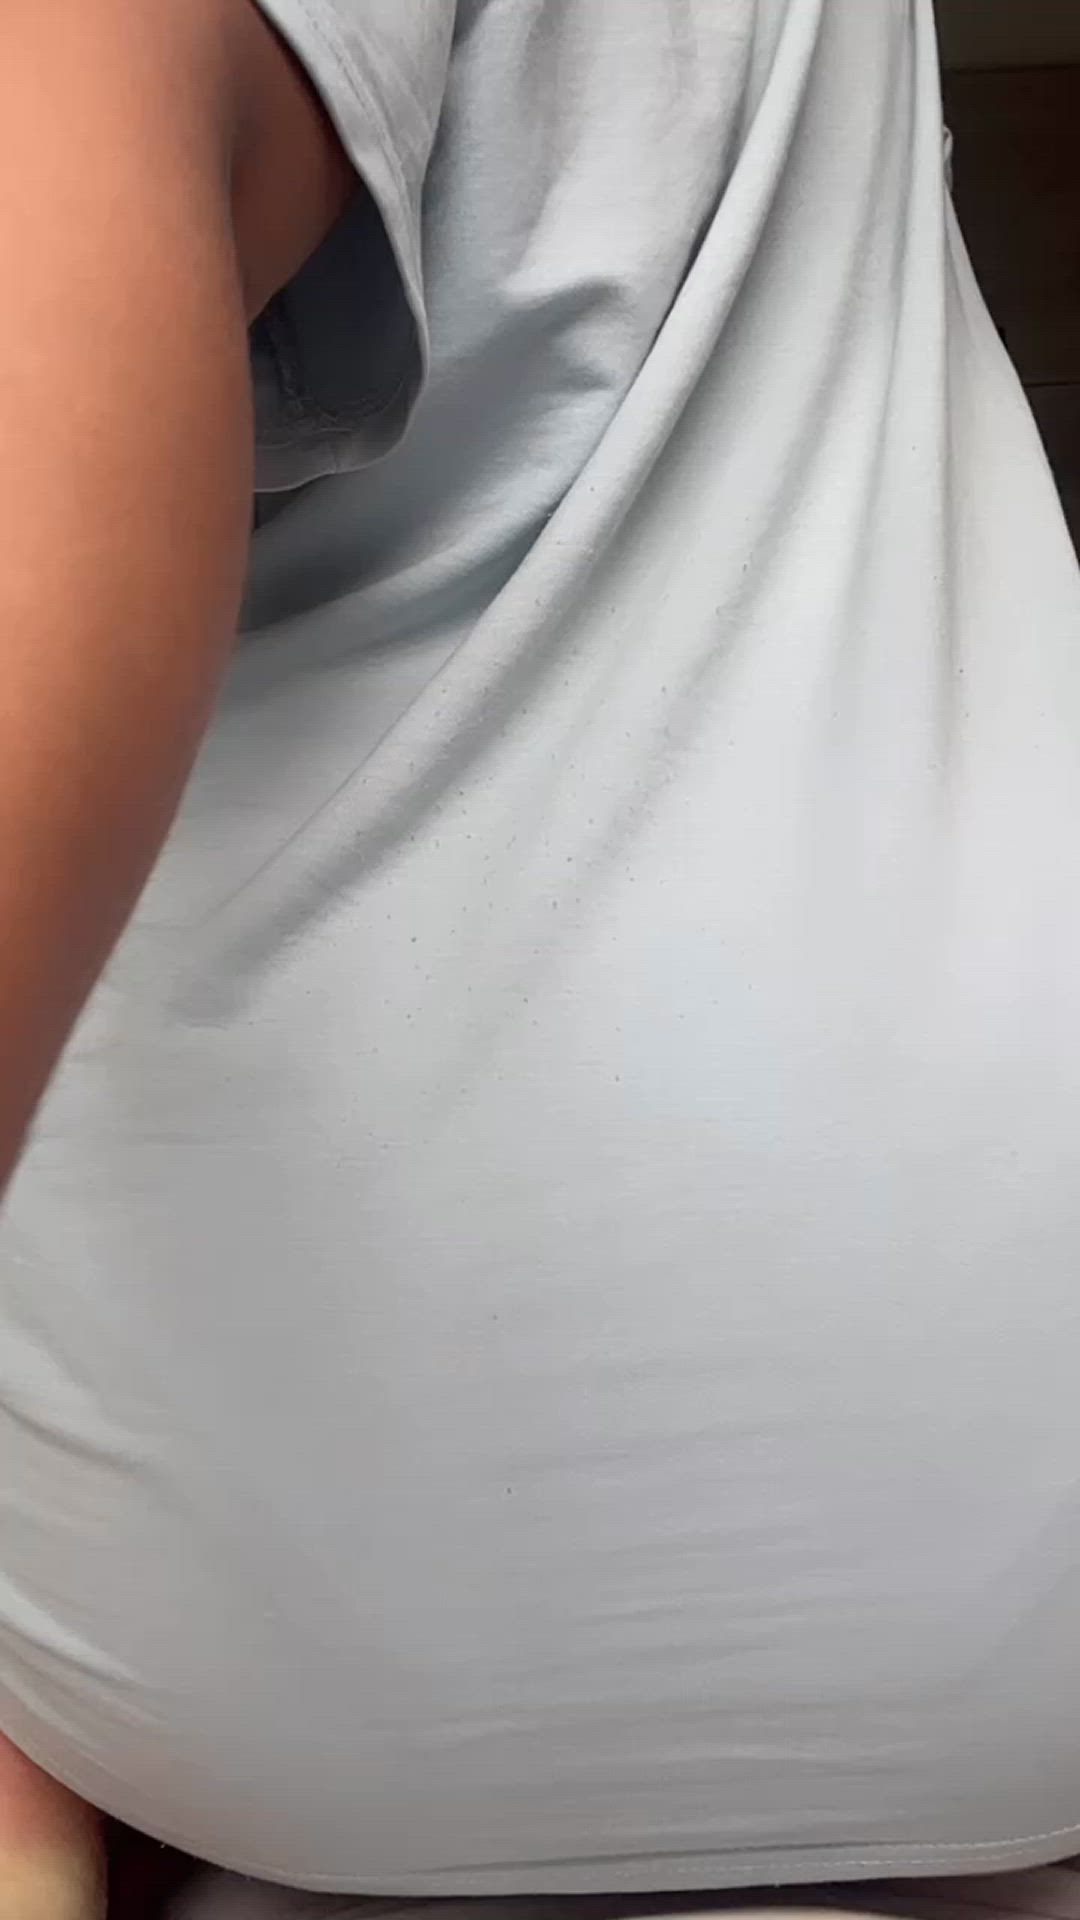 Ass porn video with onlyfans model labebaz <strong>@kittyamy1</strong>